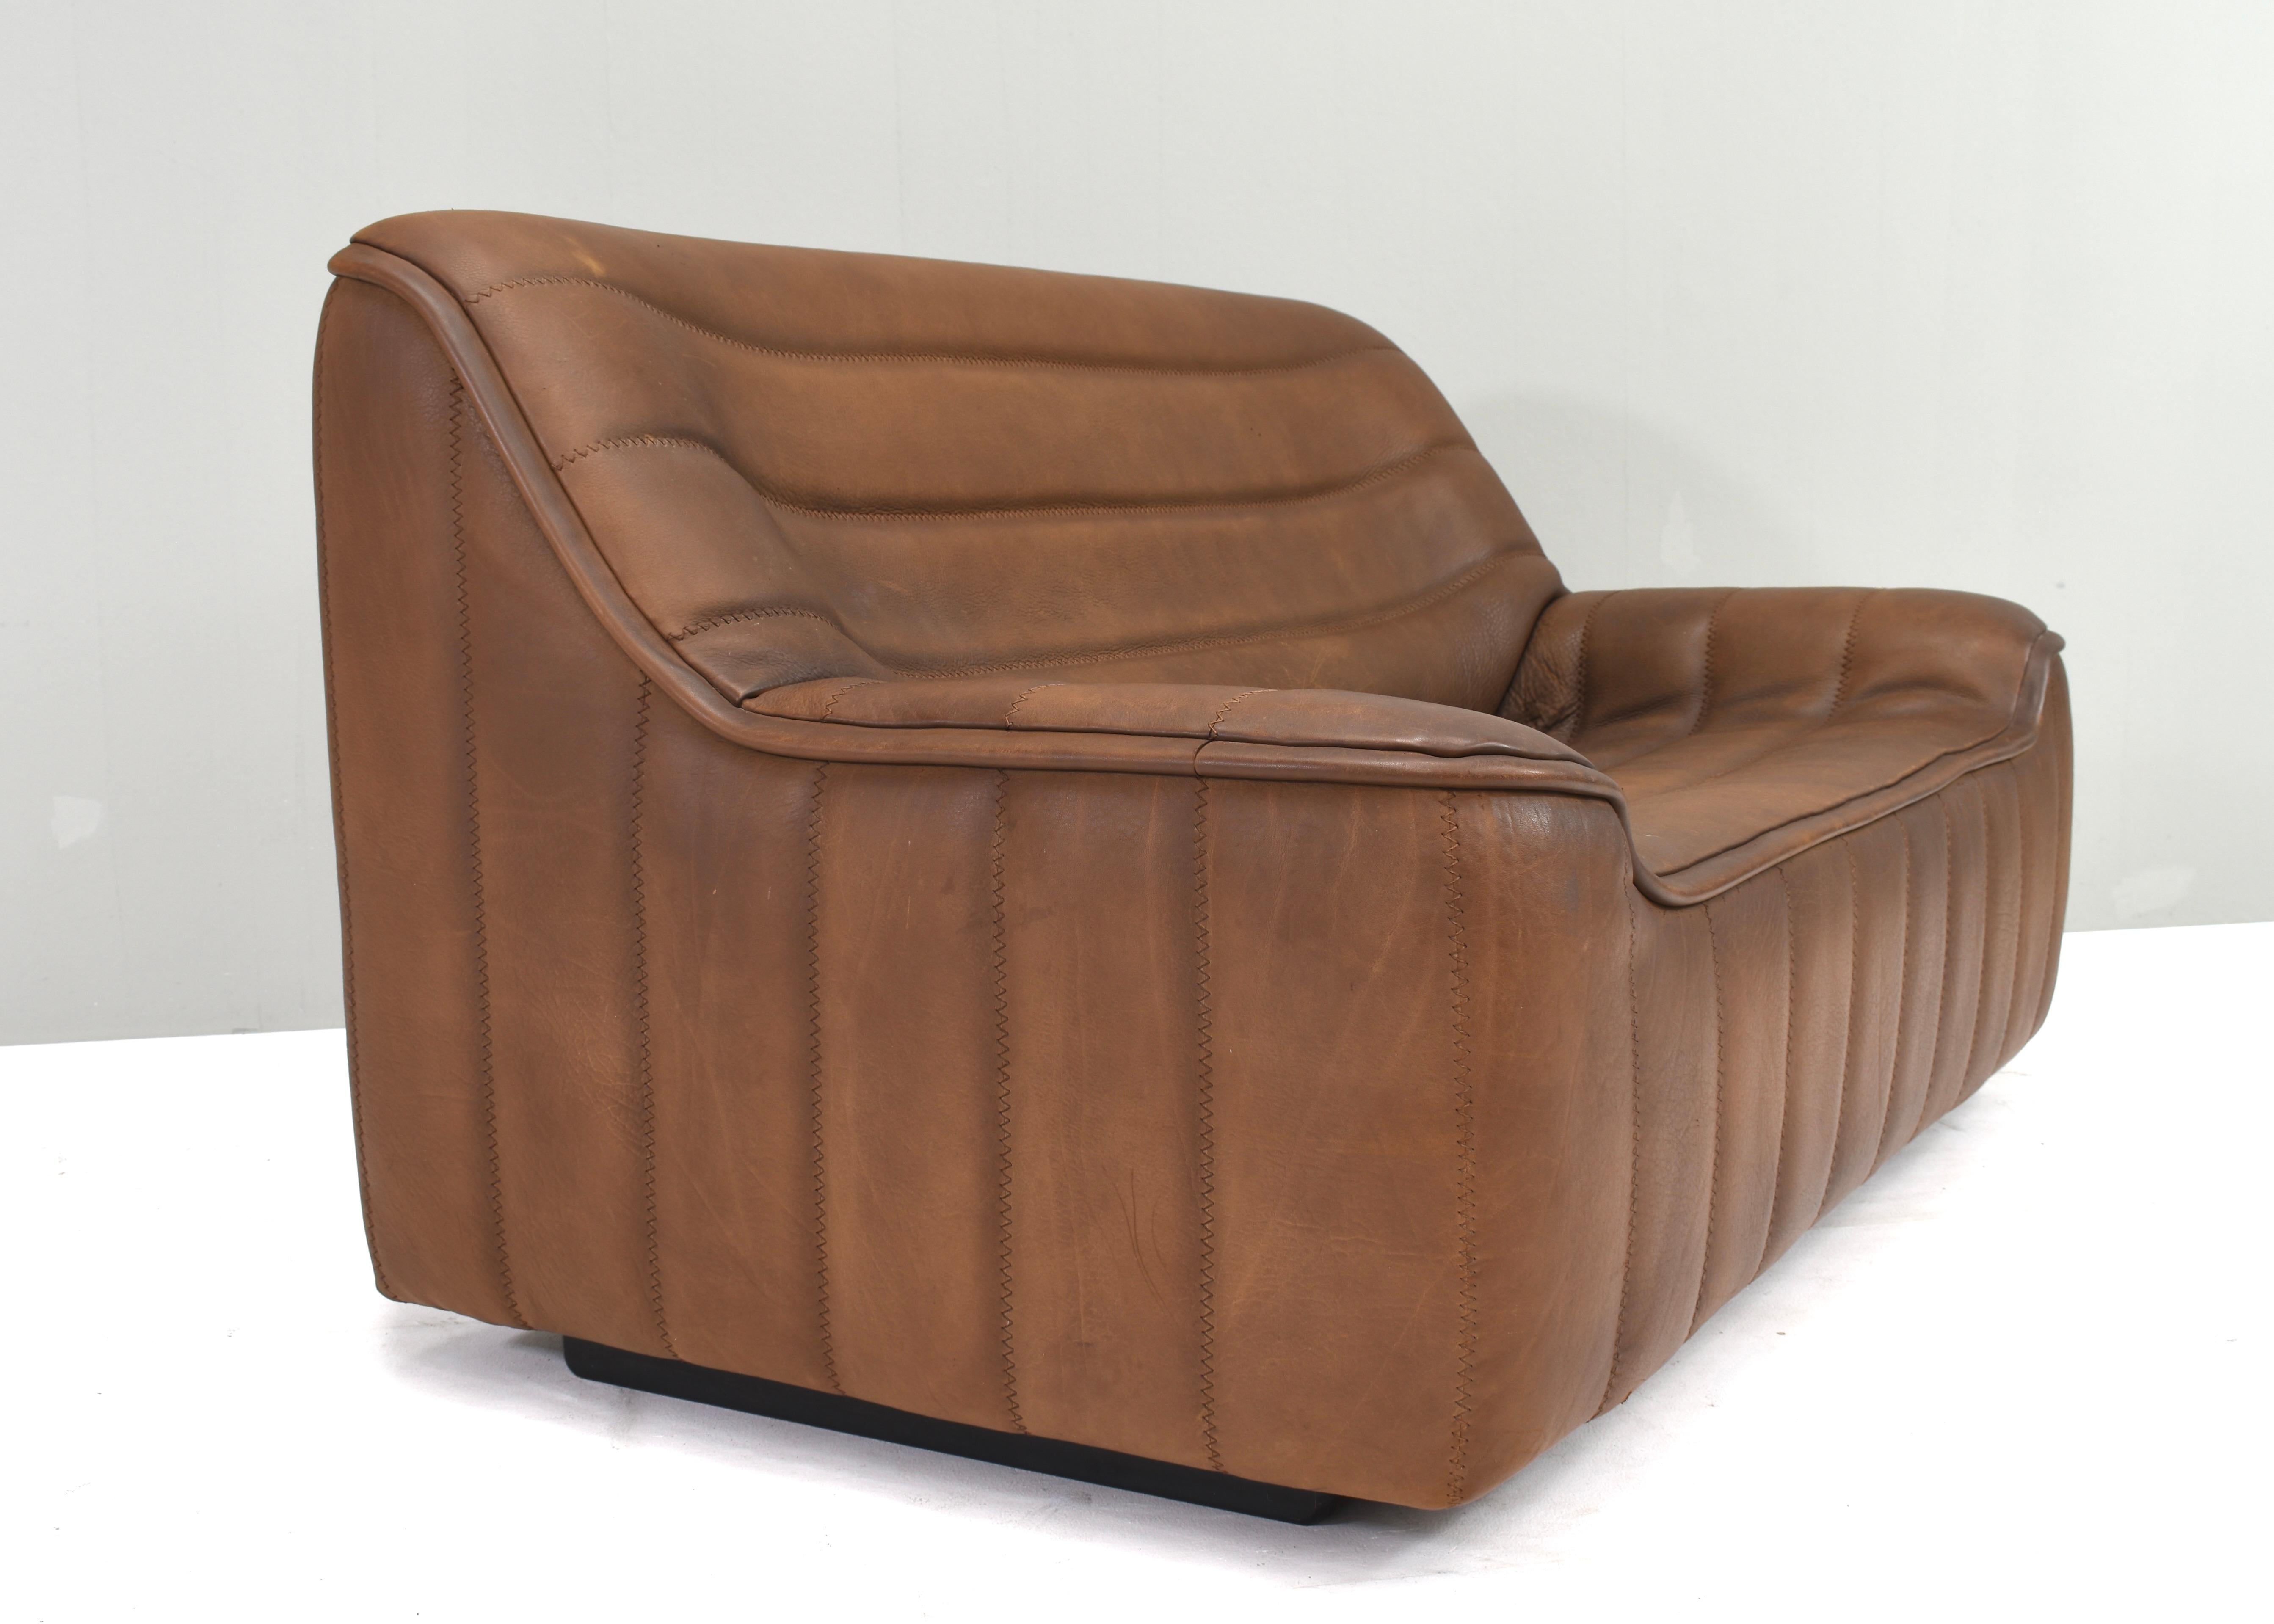 De Sede DS-84 Living room set in Tan Buffalo leather – Switzerland, circa 1970 For Sale 1